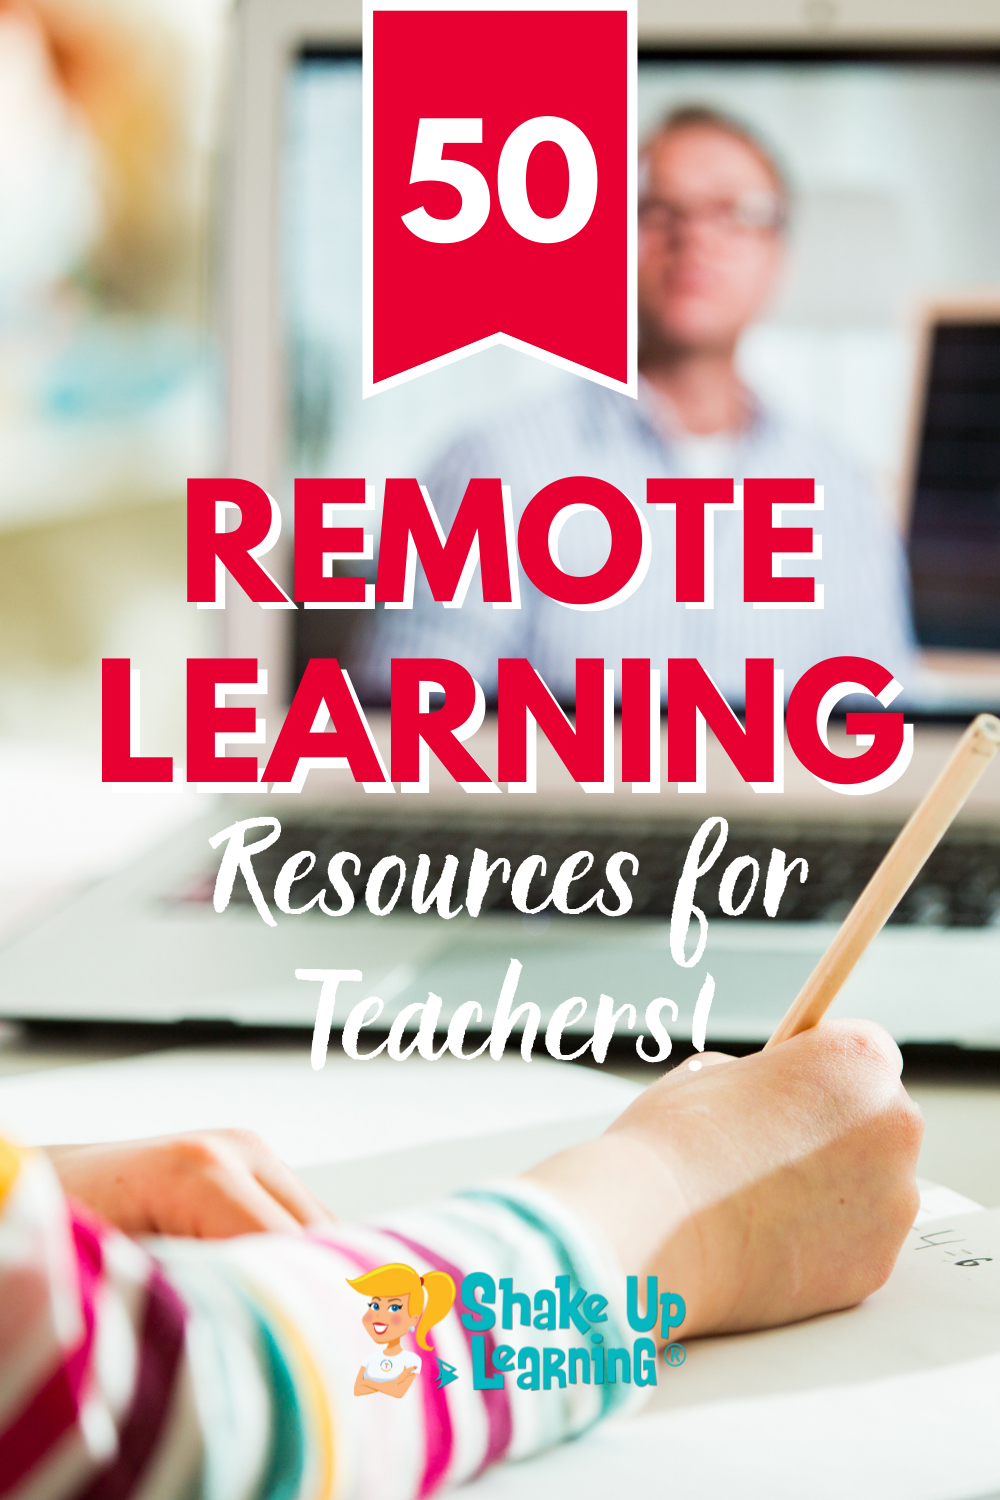 50 Remote Learning Resources for Teachers and Schools